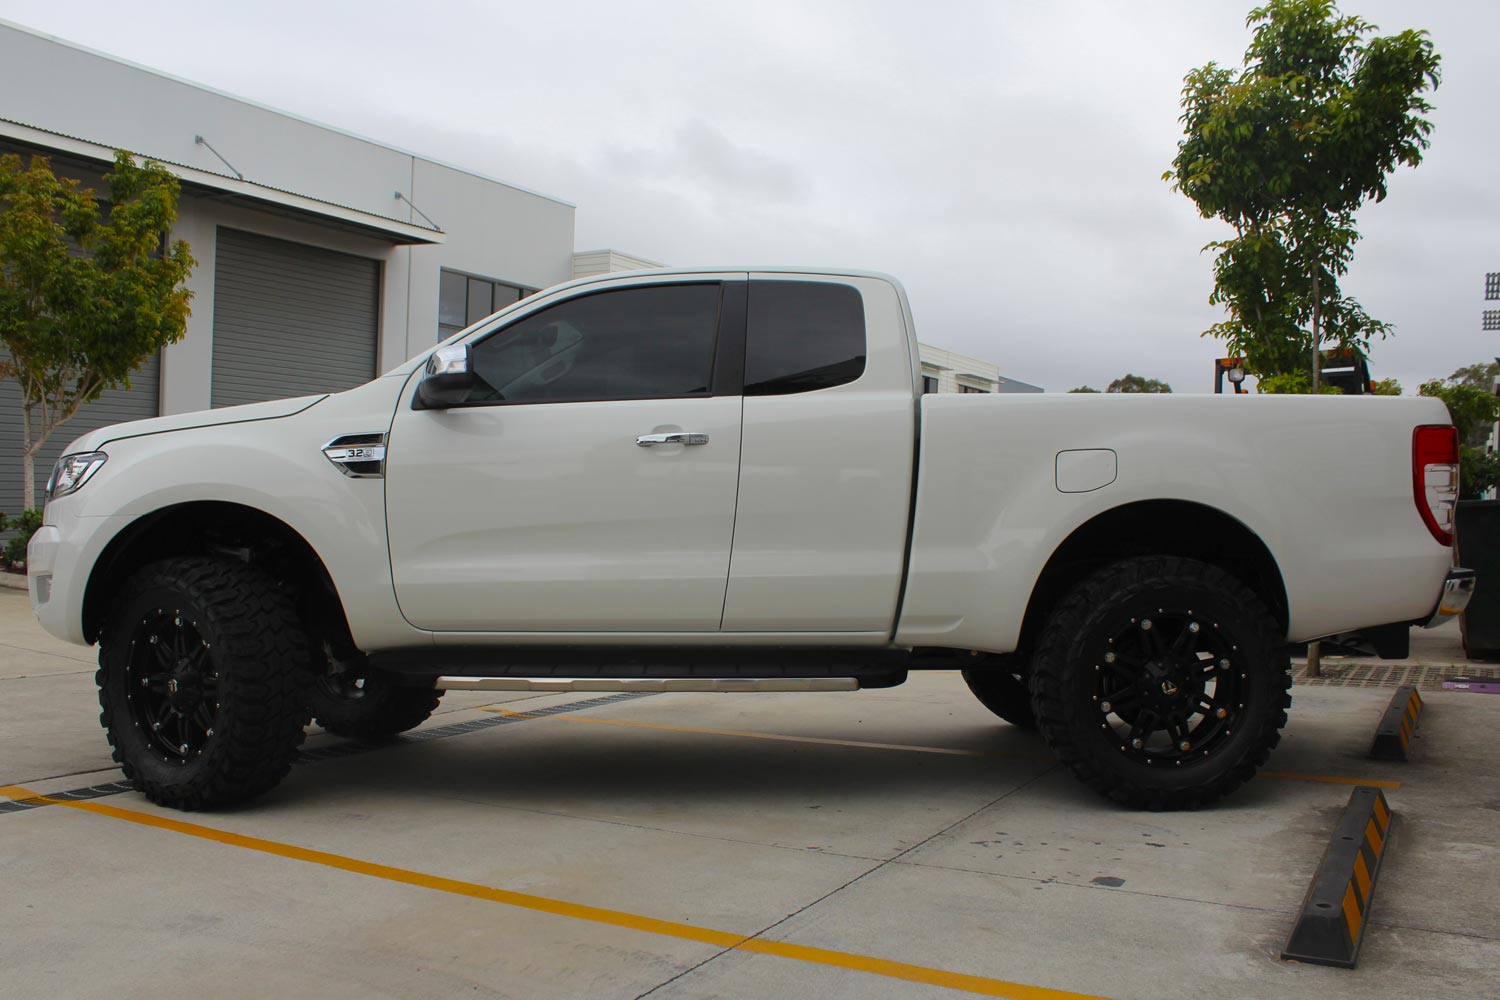 Left side view of a white Ford Ranger fitted with a heavy duty 3 inch Nitro Gas lift kit from Superior Engineering